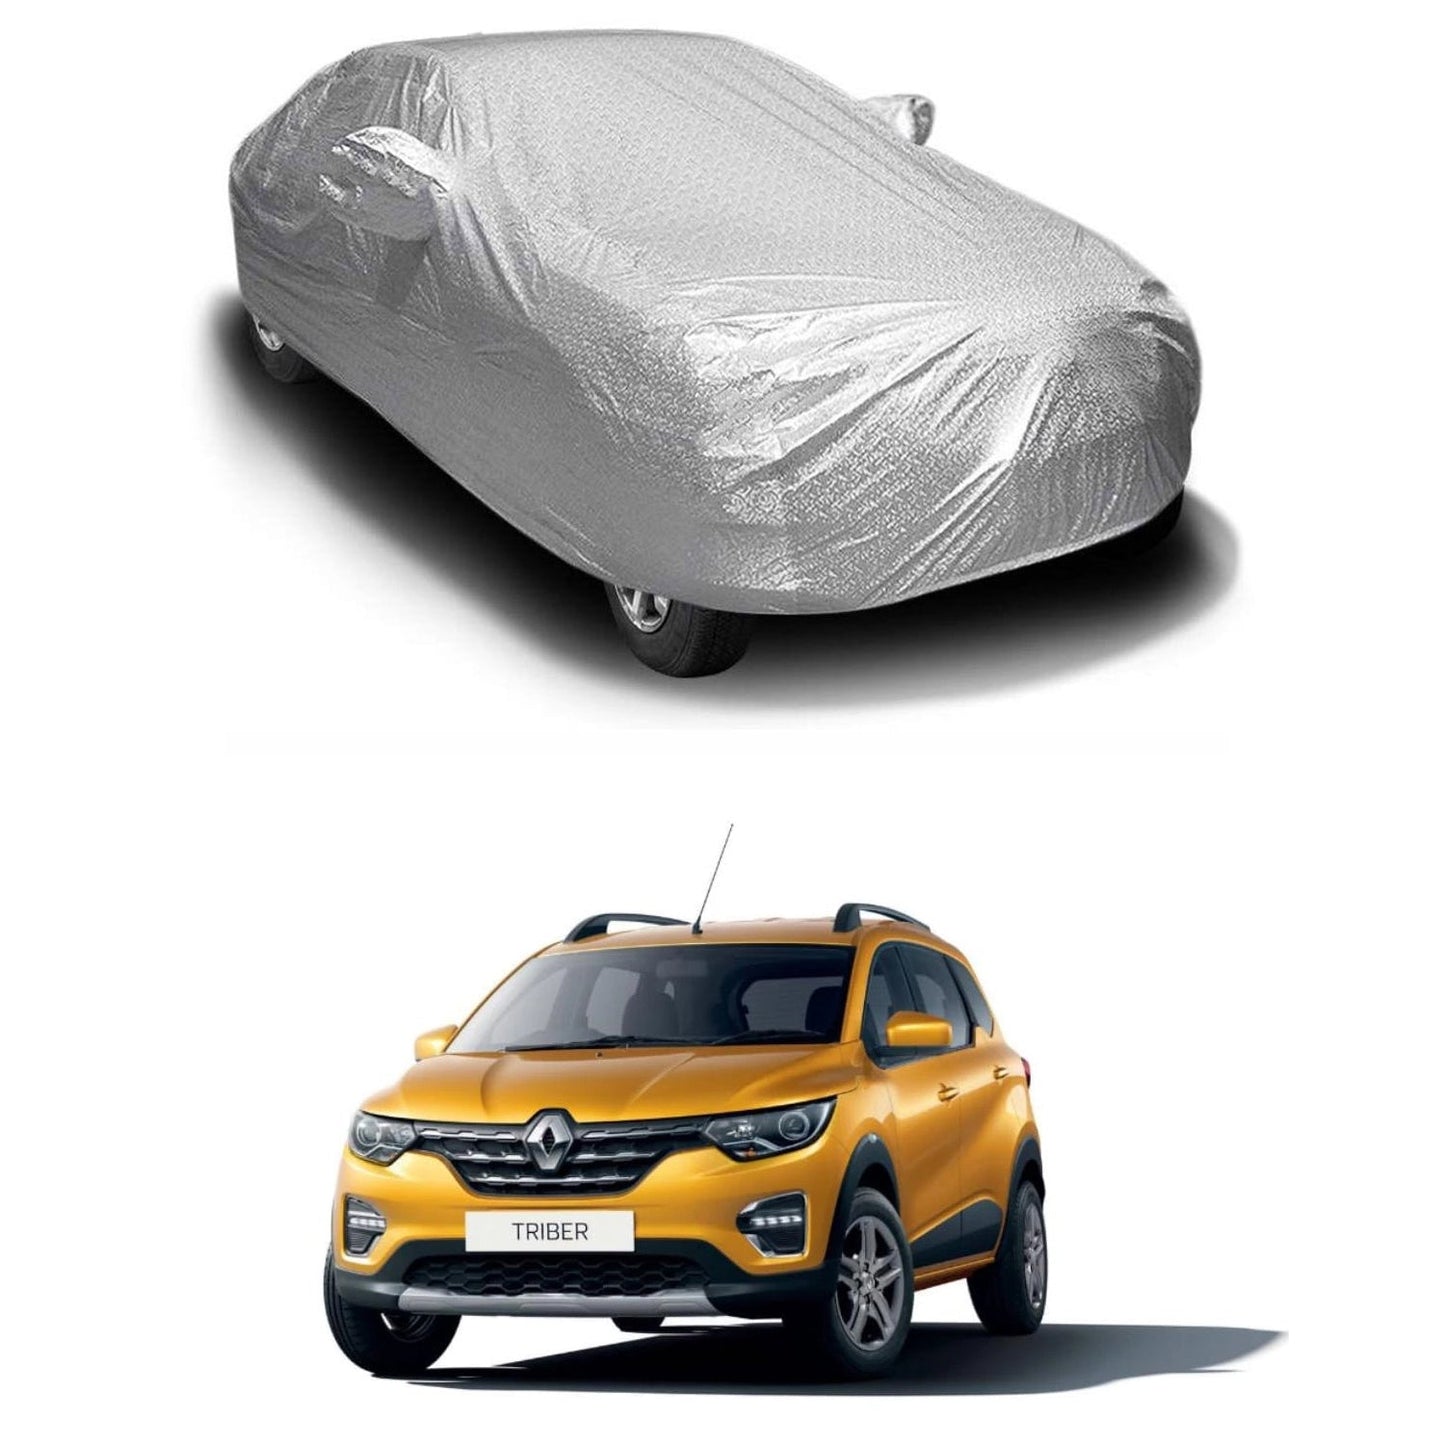 Oshotto Spyro Silver Anti Reflective, dustproof and Water Proof Car Body Cover with Mirror Pockets For Renault Triber